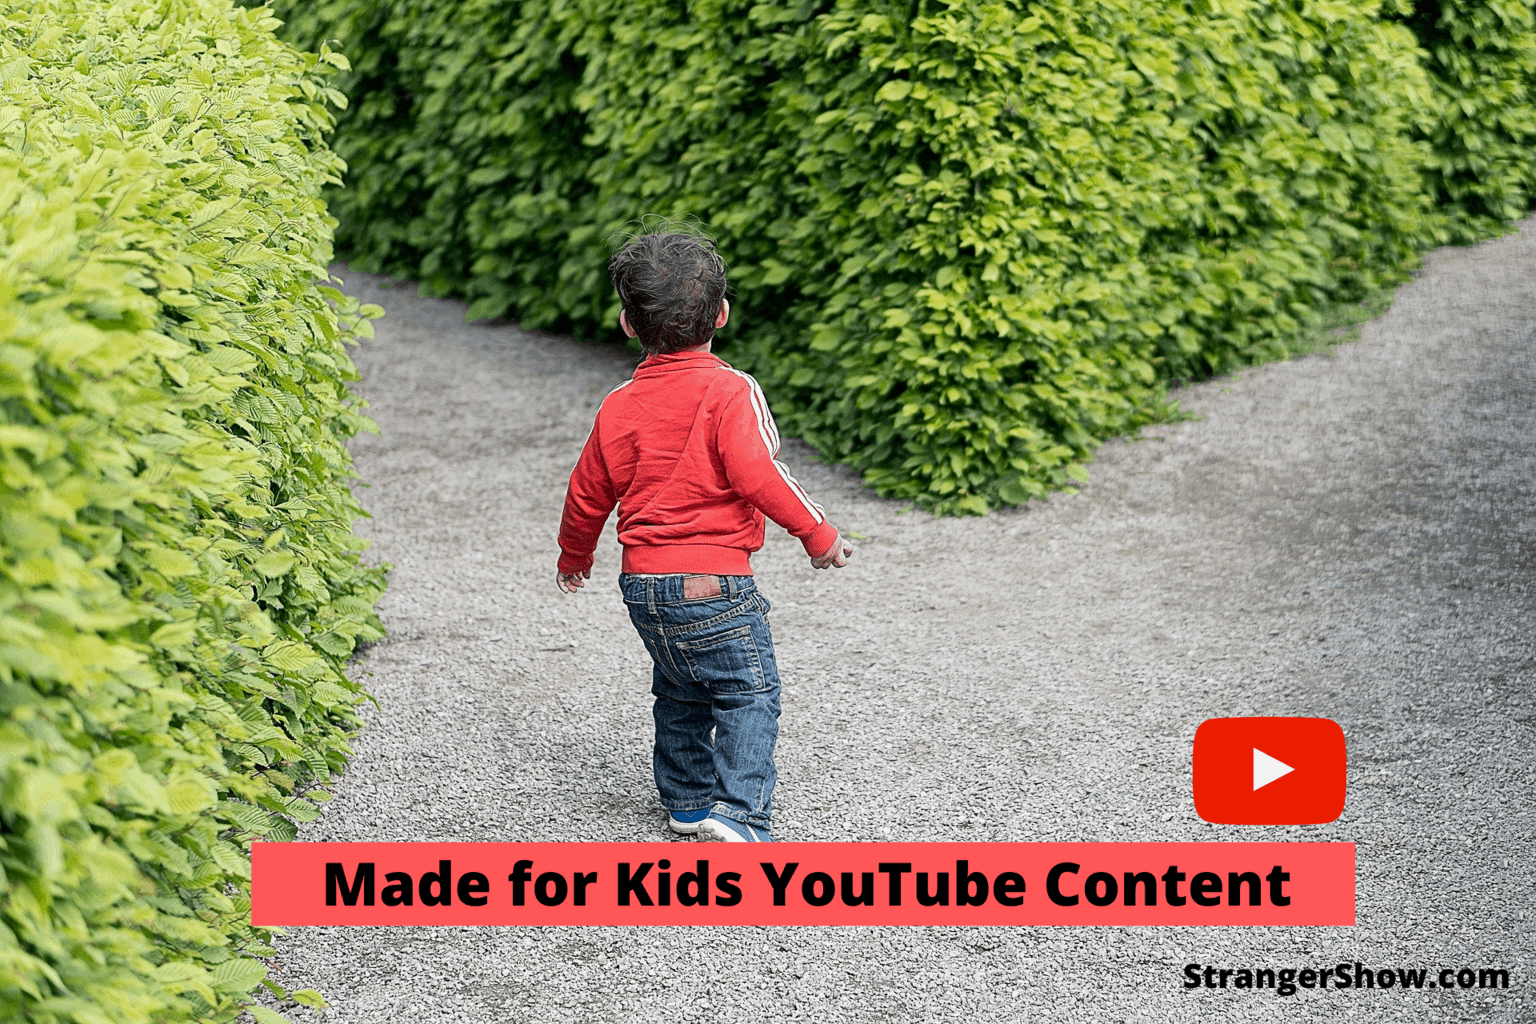 YouTube Made for Kids or Not